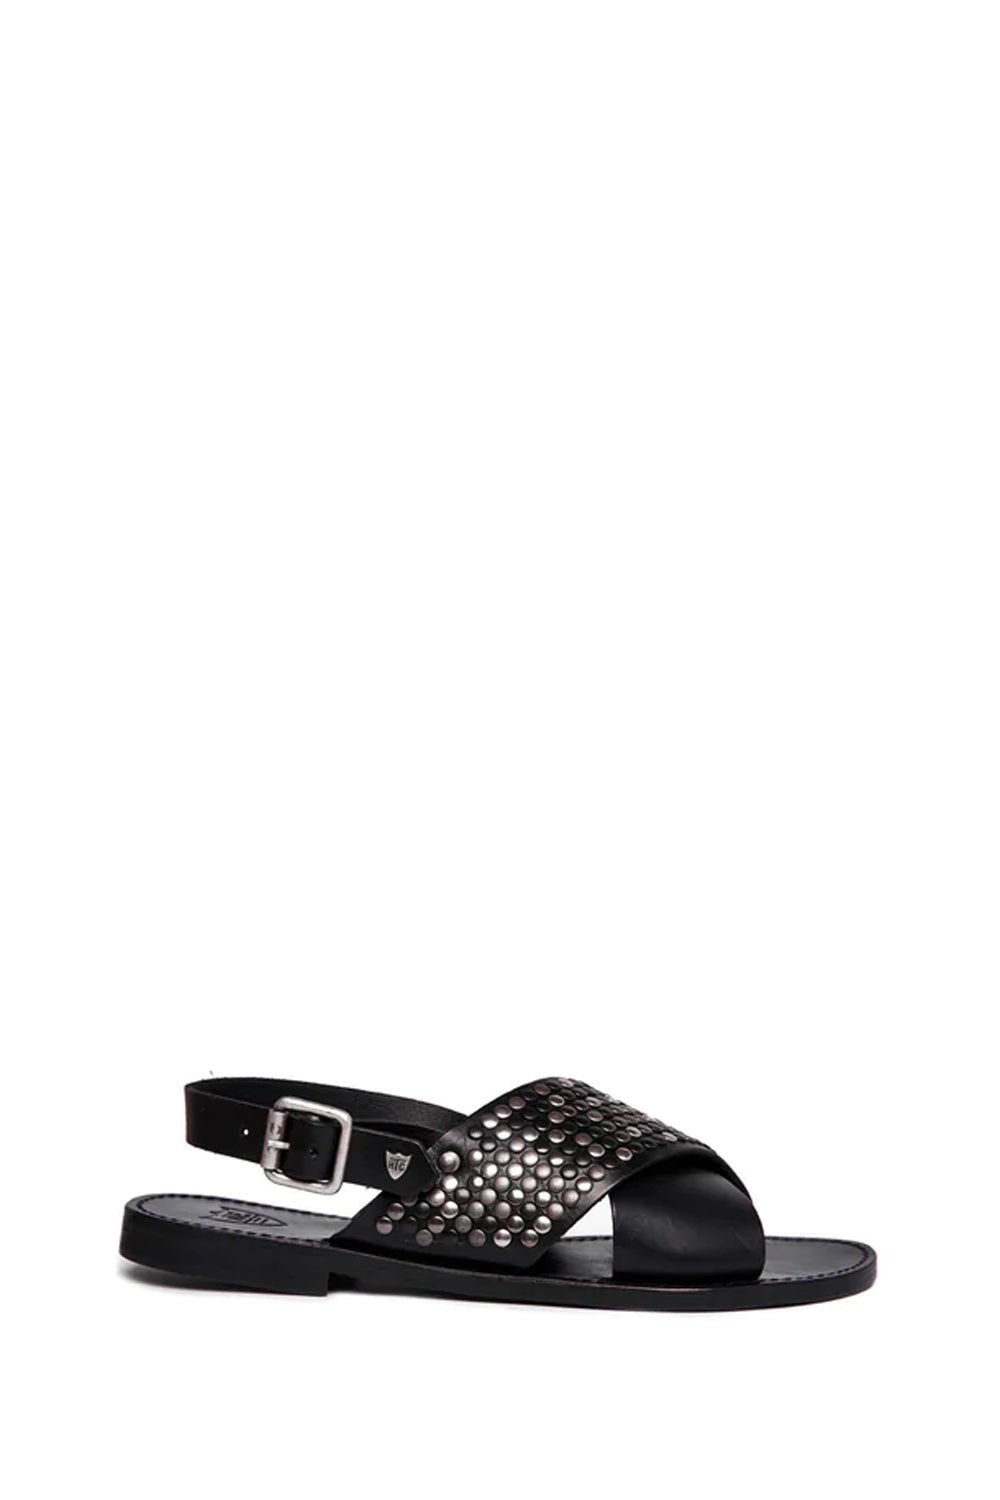 STUDDED CROSS SANDAL Black leather studded sandals. Adjustable buckle strap. Heel height: 1,5 cm. Made in Italy. HTC LOS ANGELES